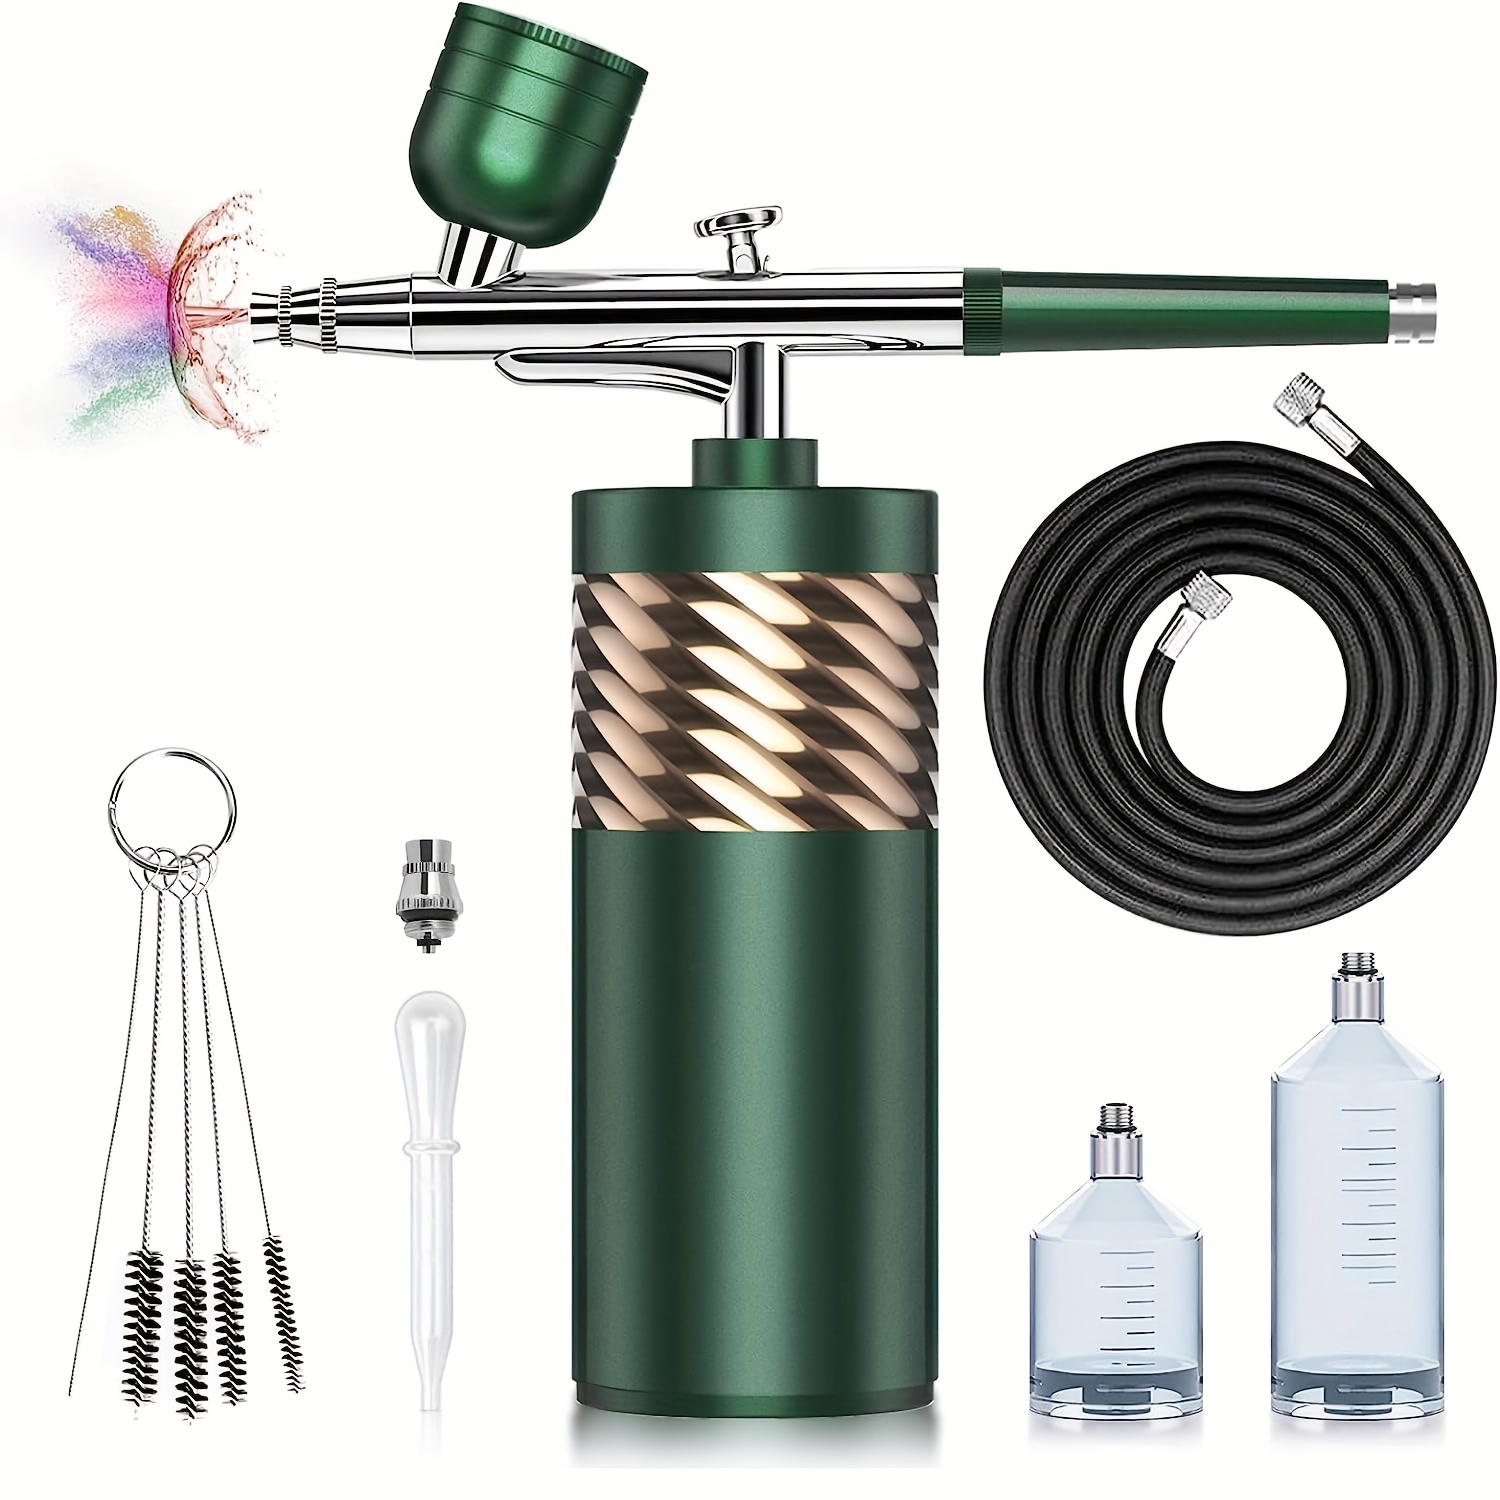 

Airbrush-kit With Compressor Portable Cordless Air Brush Gun Set For Painting Model Nail Tattoo Cake Decorating Rechargeable Mini Handheld Airbrush